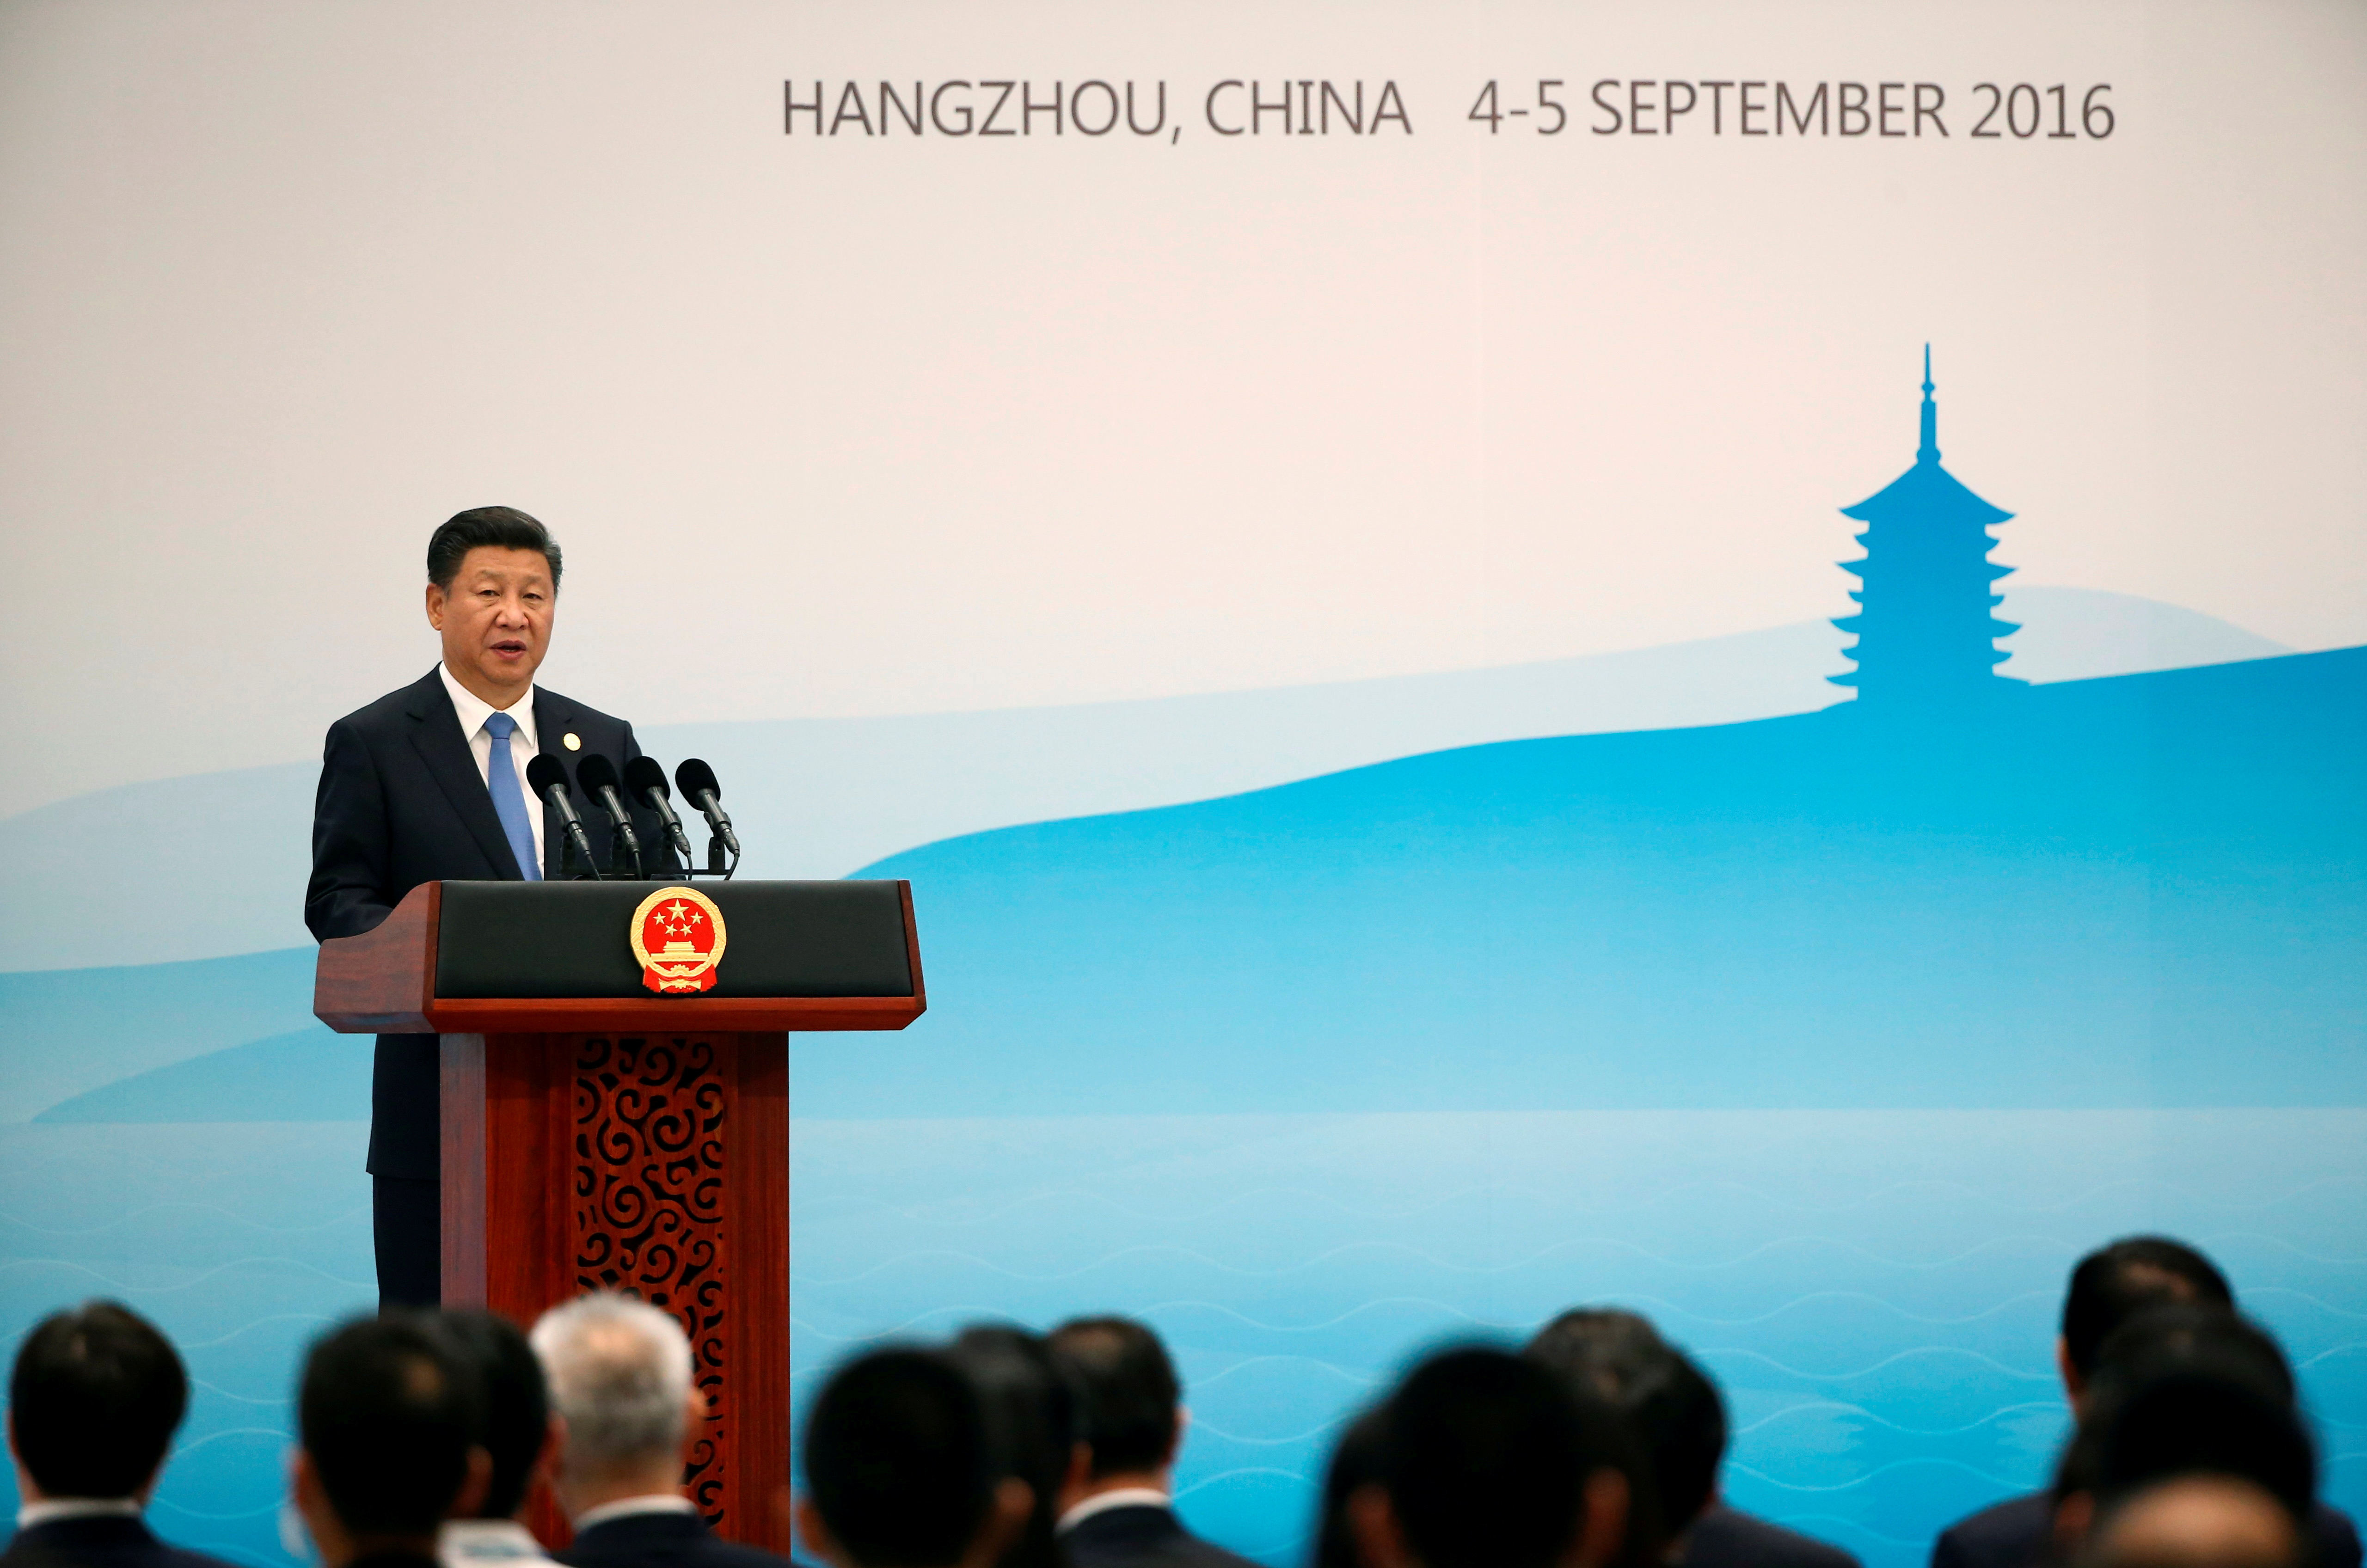 China's President Xi Jinping speaks at a news conference after the closing of G20 Summit in Hangzhou